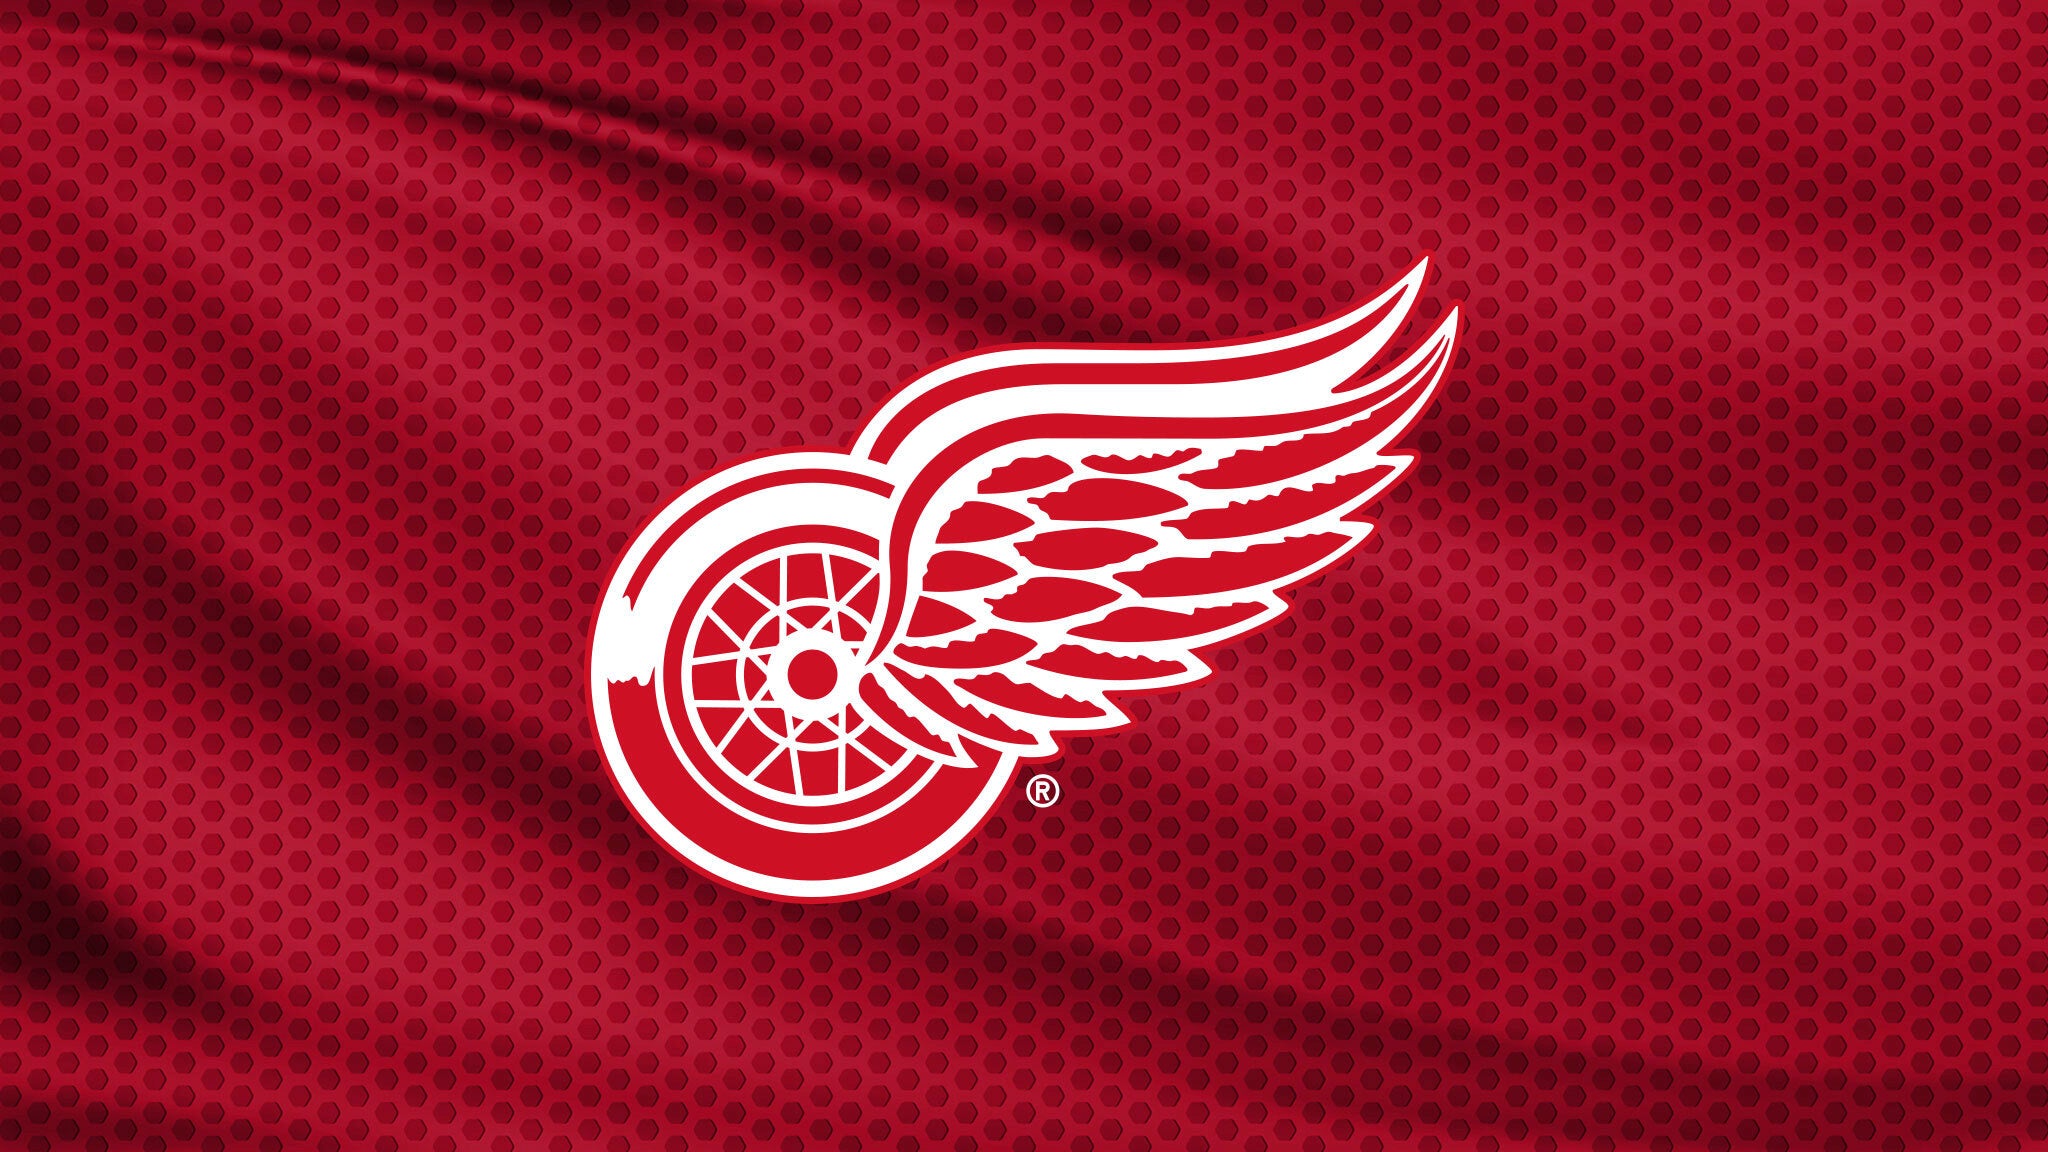 Detroit Red Wings vs. Columbus Blue Jackets in Detroit promo photo for Single Game presale offer code